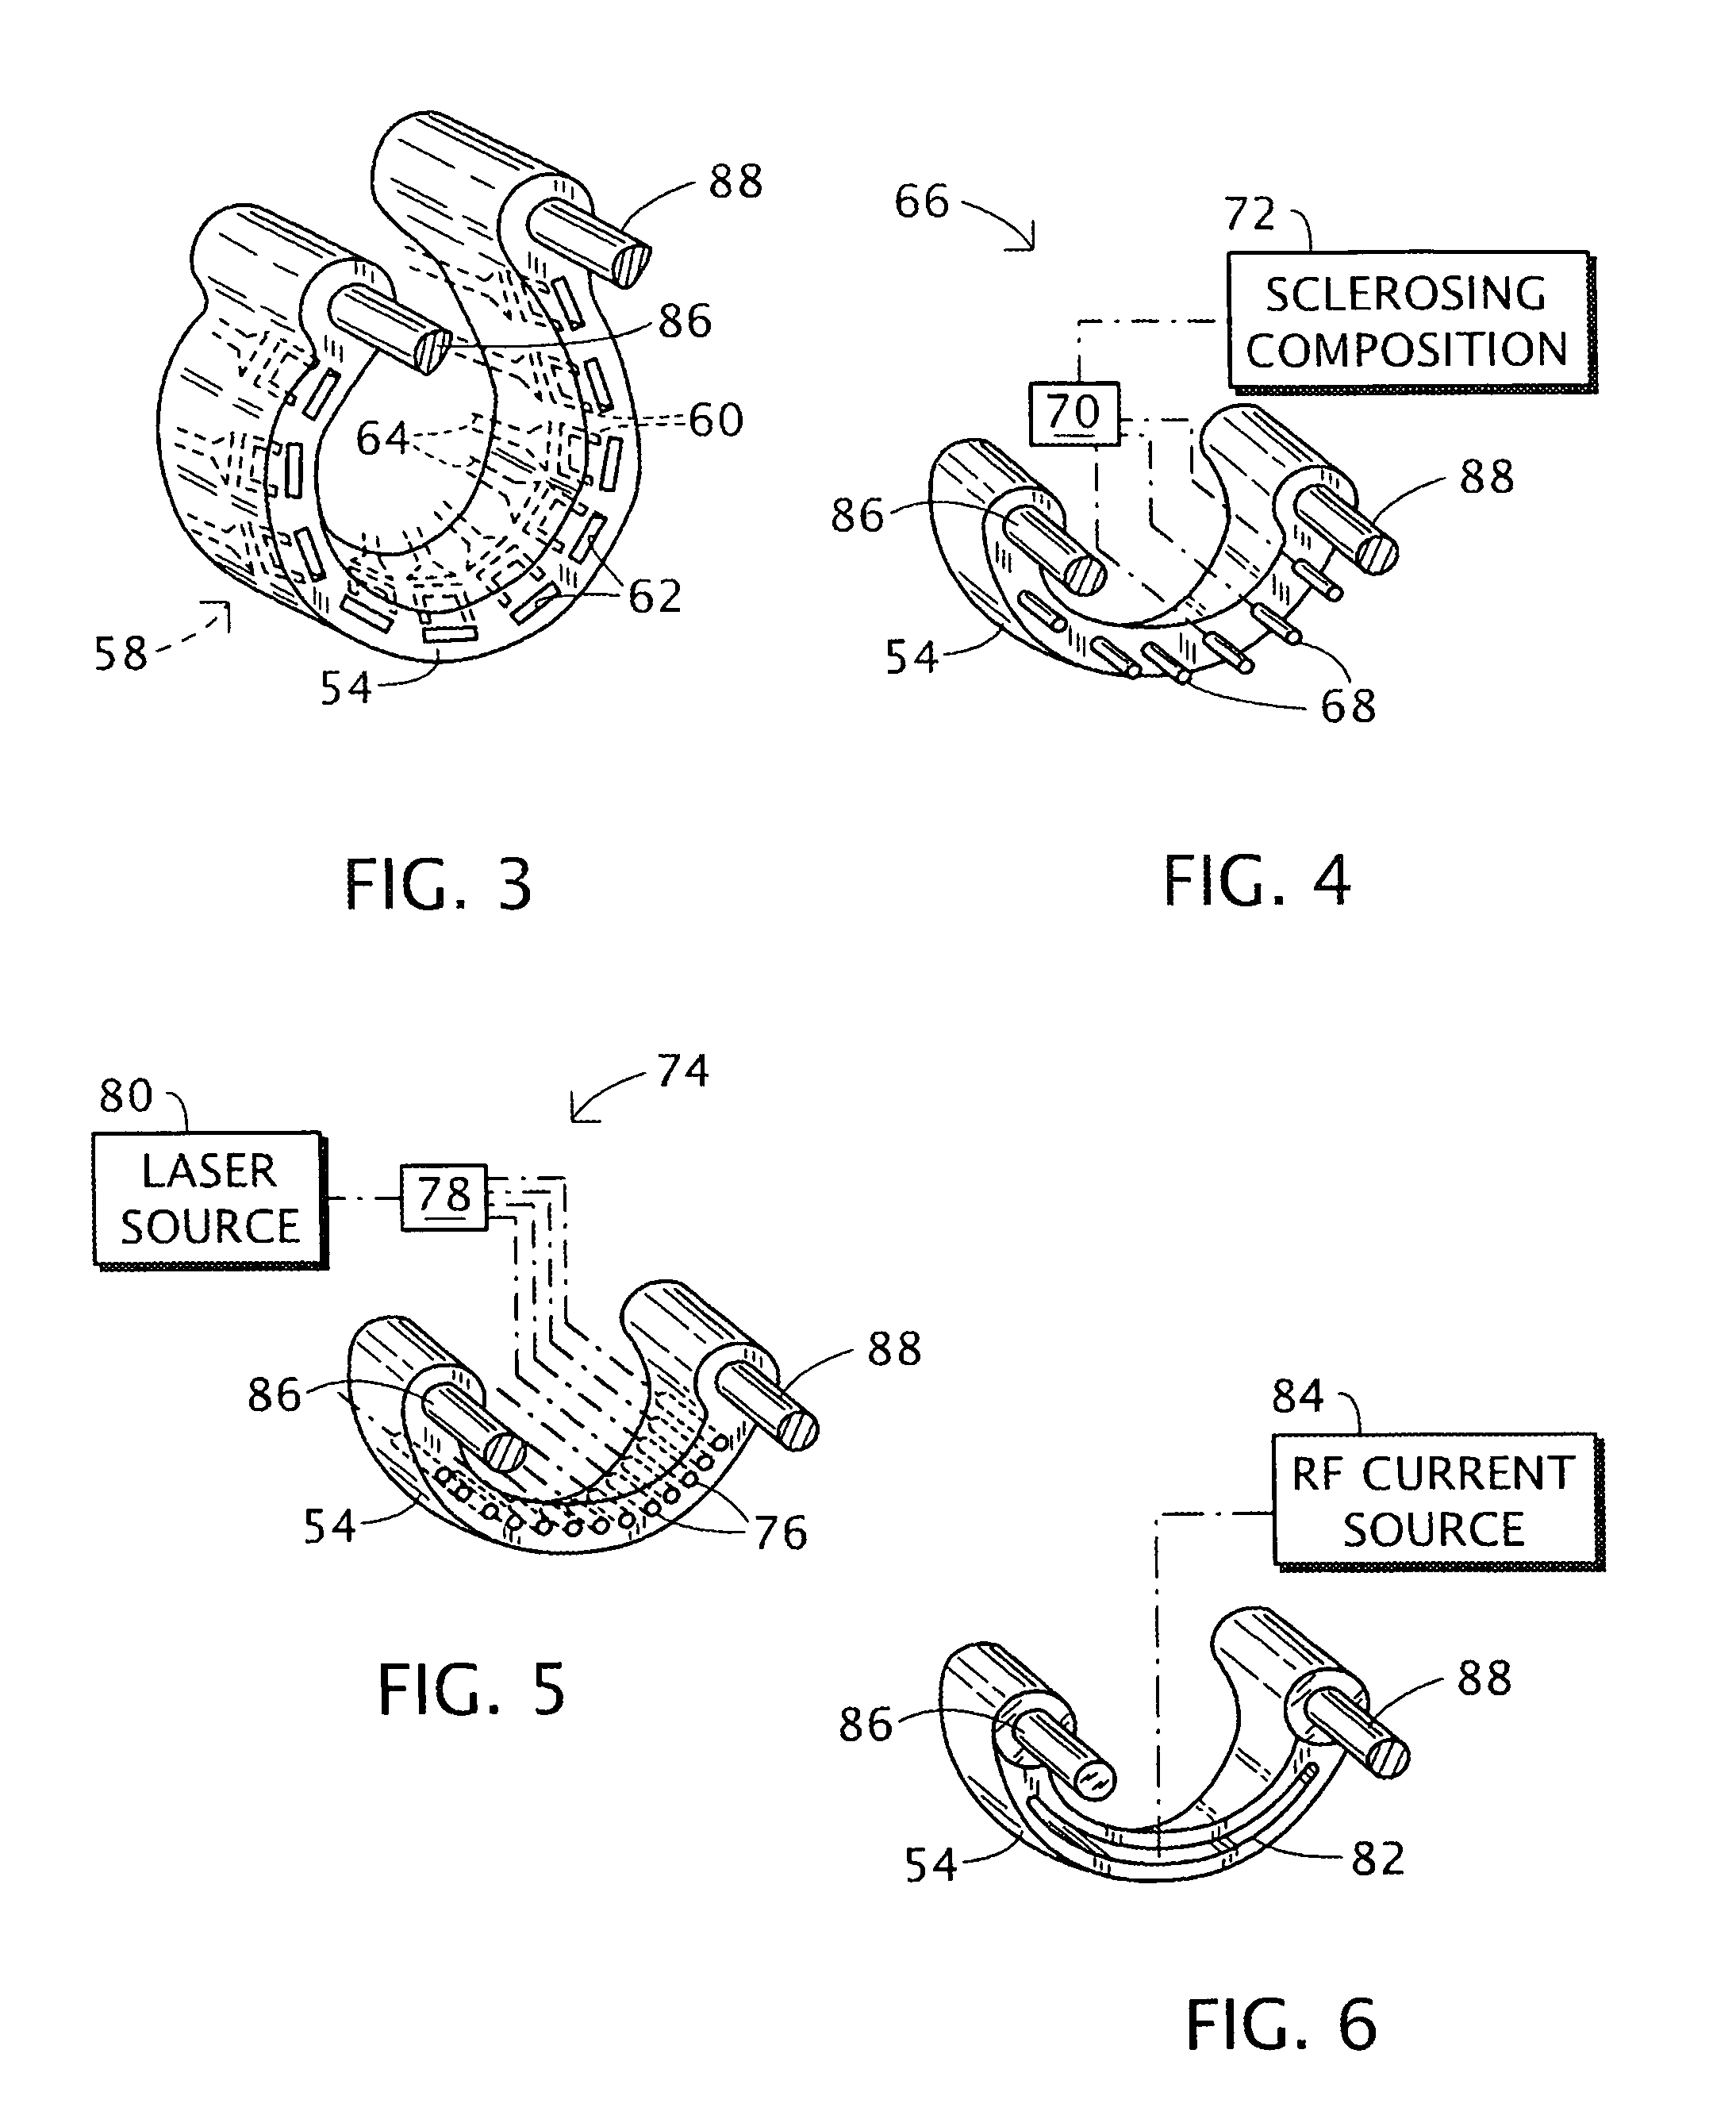 Hemorrhoids treatment method and associated instrument assembly including anoscope and cofunctioning tissue occlusion device